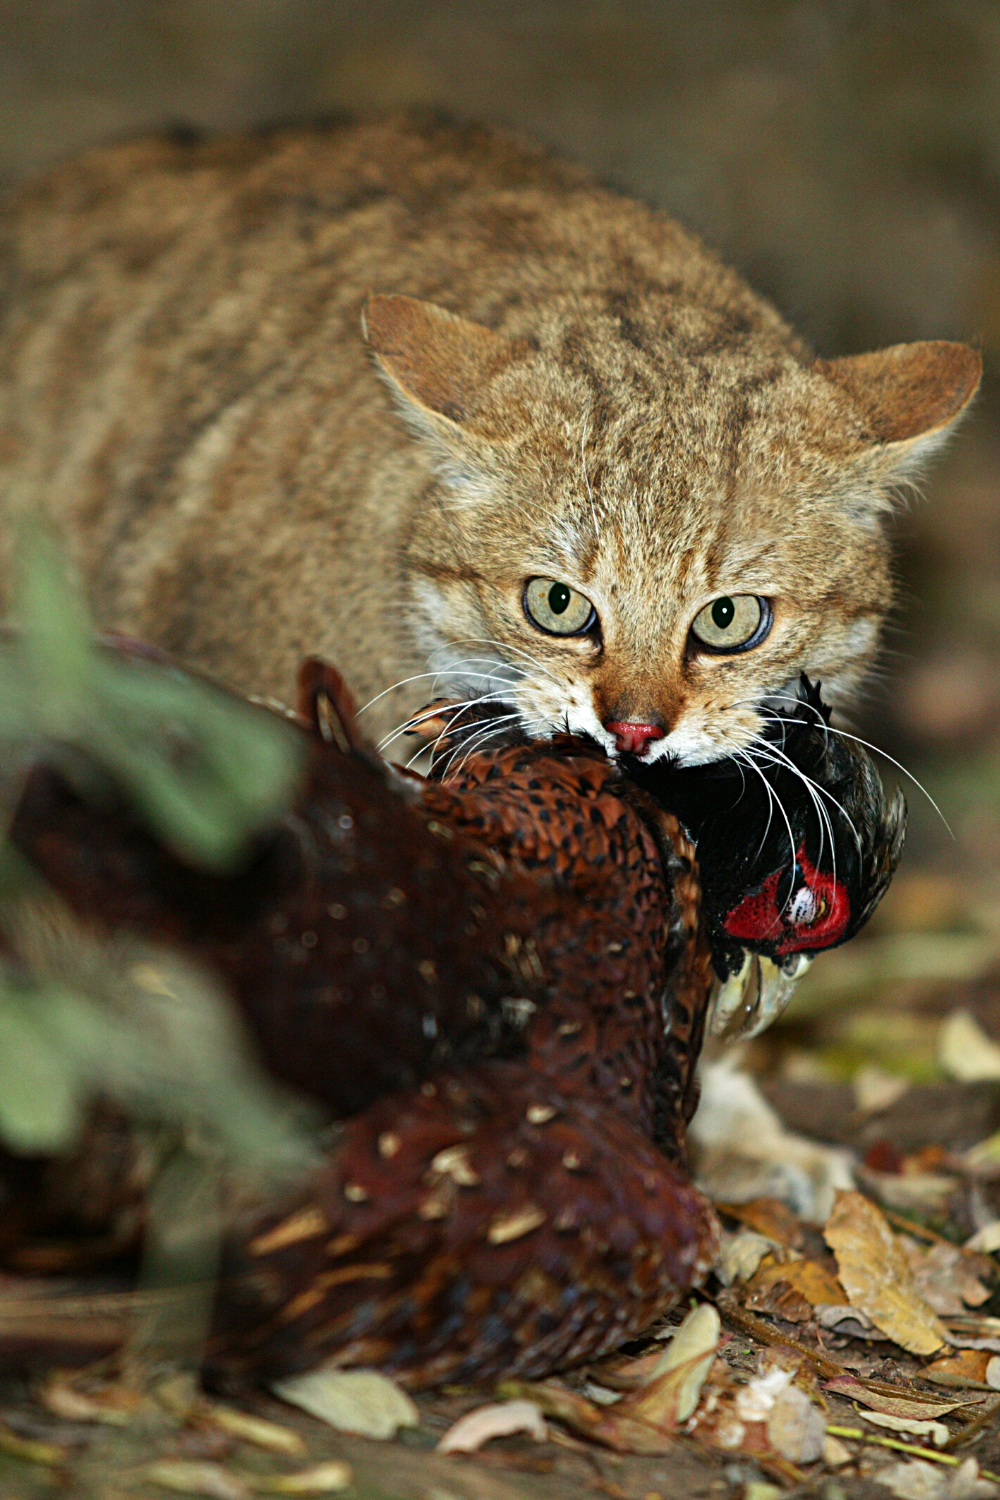 Larger wildcats eat larger, more filling, prey like bats, wild rabbits, and occasionally includes birds